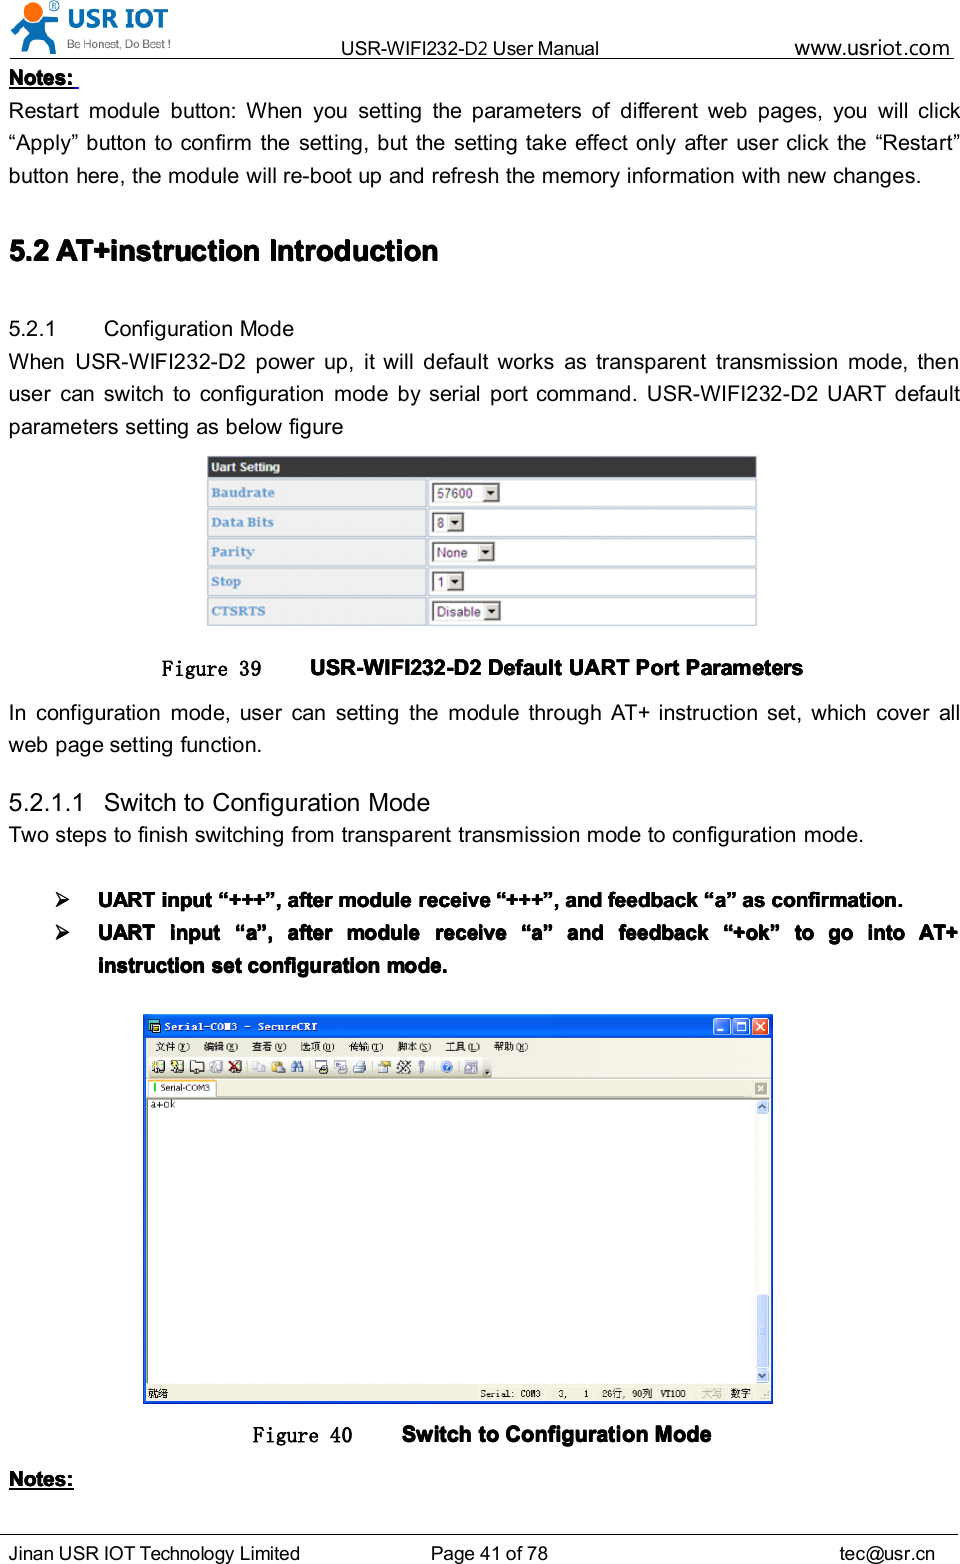 USR-WIFI232- D2 User Manual www.usr iot .comJinan USR IOT Technology Limited Page 41 of 78 tec@usr.cnNotes:Notes:Notes:Notes:Restart module button: When you setting the parameters of different web pages, you will click“ Apply ” button to confirm the setting, but the setting take effect only after user click the “ Restart ”button here, the module will re-boot up and ref re sh the memory information with new changes.5.25.25.25.2 AT+instructionAT+instructionAT+instructionAT+instruction IntroductionIntroductionIntroductionIntroduction5.2.1 Configuration ModeWhen USR-WIFI232-D2 power up, it will default works as transparent transmission mode, thenuser can switch to configuration mode by serial port command. USR-WIFI232-D2 UART defaultparameters setting as below figureFigure 39 USR-WIFI232-D2USR-WIFI232-D2USR-WIFI232-D2USR-WIFI232-D2 DefaultDefaultDefaultDefault UARTUARTUARTUART PortPortPortPort ParametersParametersParametersParametersIn configuration mode, user can setting the module through AT+ instruction set, which cover allweb page setting function.5.2.1.1 Switch to Configuration ModeTwo steps to finish switching from transparent transmission mode to configuration mode.UARTUARTUARTUART inputinputinputinput ““““ ++++++++++++ ”””” ,,,, afterafterafterafter modulemodulemodulemodule receivereceivereceivereceive ““““ ++++++++++++ ”””” ,,,, andandandand feedbackfeedbackfeedbackfeedback ““““ aaaa ”””” asasasas confirmation.confirmation.confirmation.confirmation.UARTUARTUARTUART inputinputinputinput ““““ aaaa ”””” ,,,, afterafterafterafter modulemodulemodulemodule receivereceivereceivereceive ““““ aaaa ”””” andandandand feedbackfeedbackfeedbackfeedback ““““ +ok+ok+ok+ok ”””” totototo gogogogo intointointointo AT+AT+AT+AT+instructioninstructioninstructioninstruction setsetsetset configurationconfigurationconfigurationconfiguration mode.mode.mode.mode.Figure 40 SwitchSwitchSwitchSwitch totototo ConfigurationConfigurationConfigurationConfiguration ModeModeModeModeNotes:Notes:Notes:Notes: